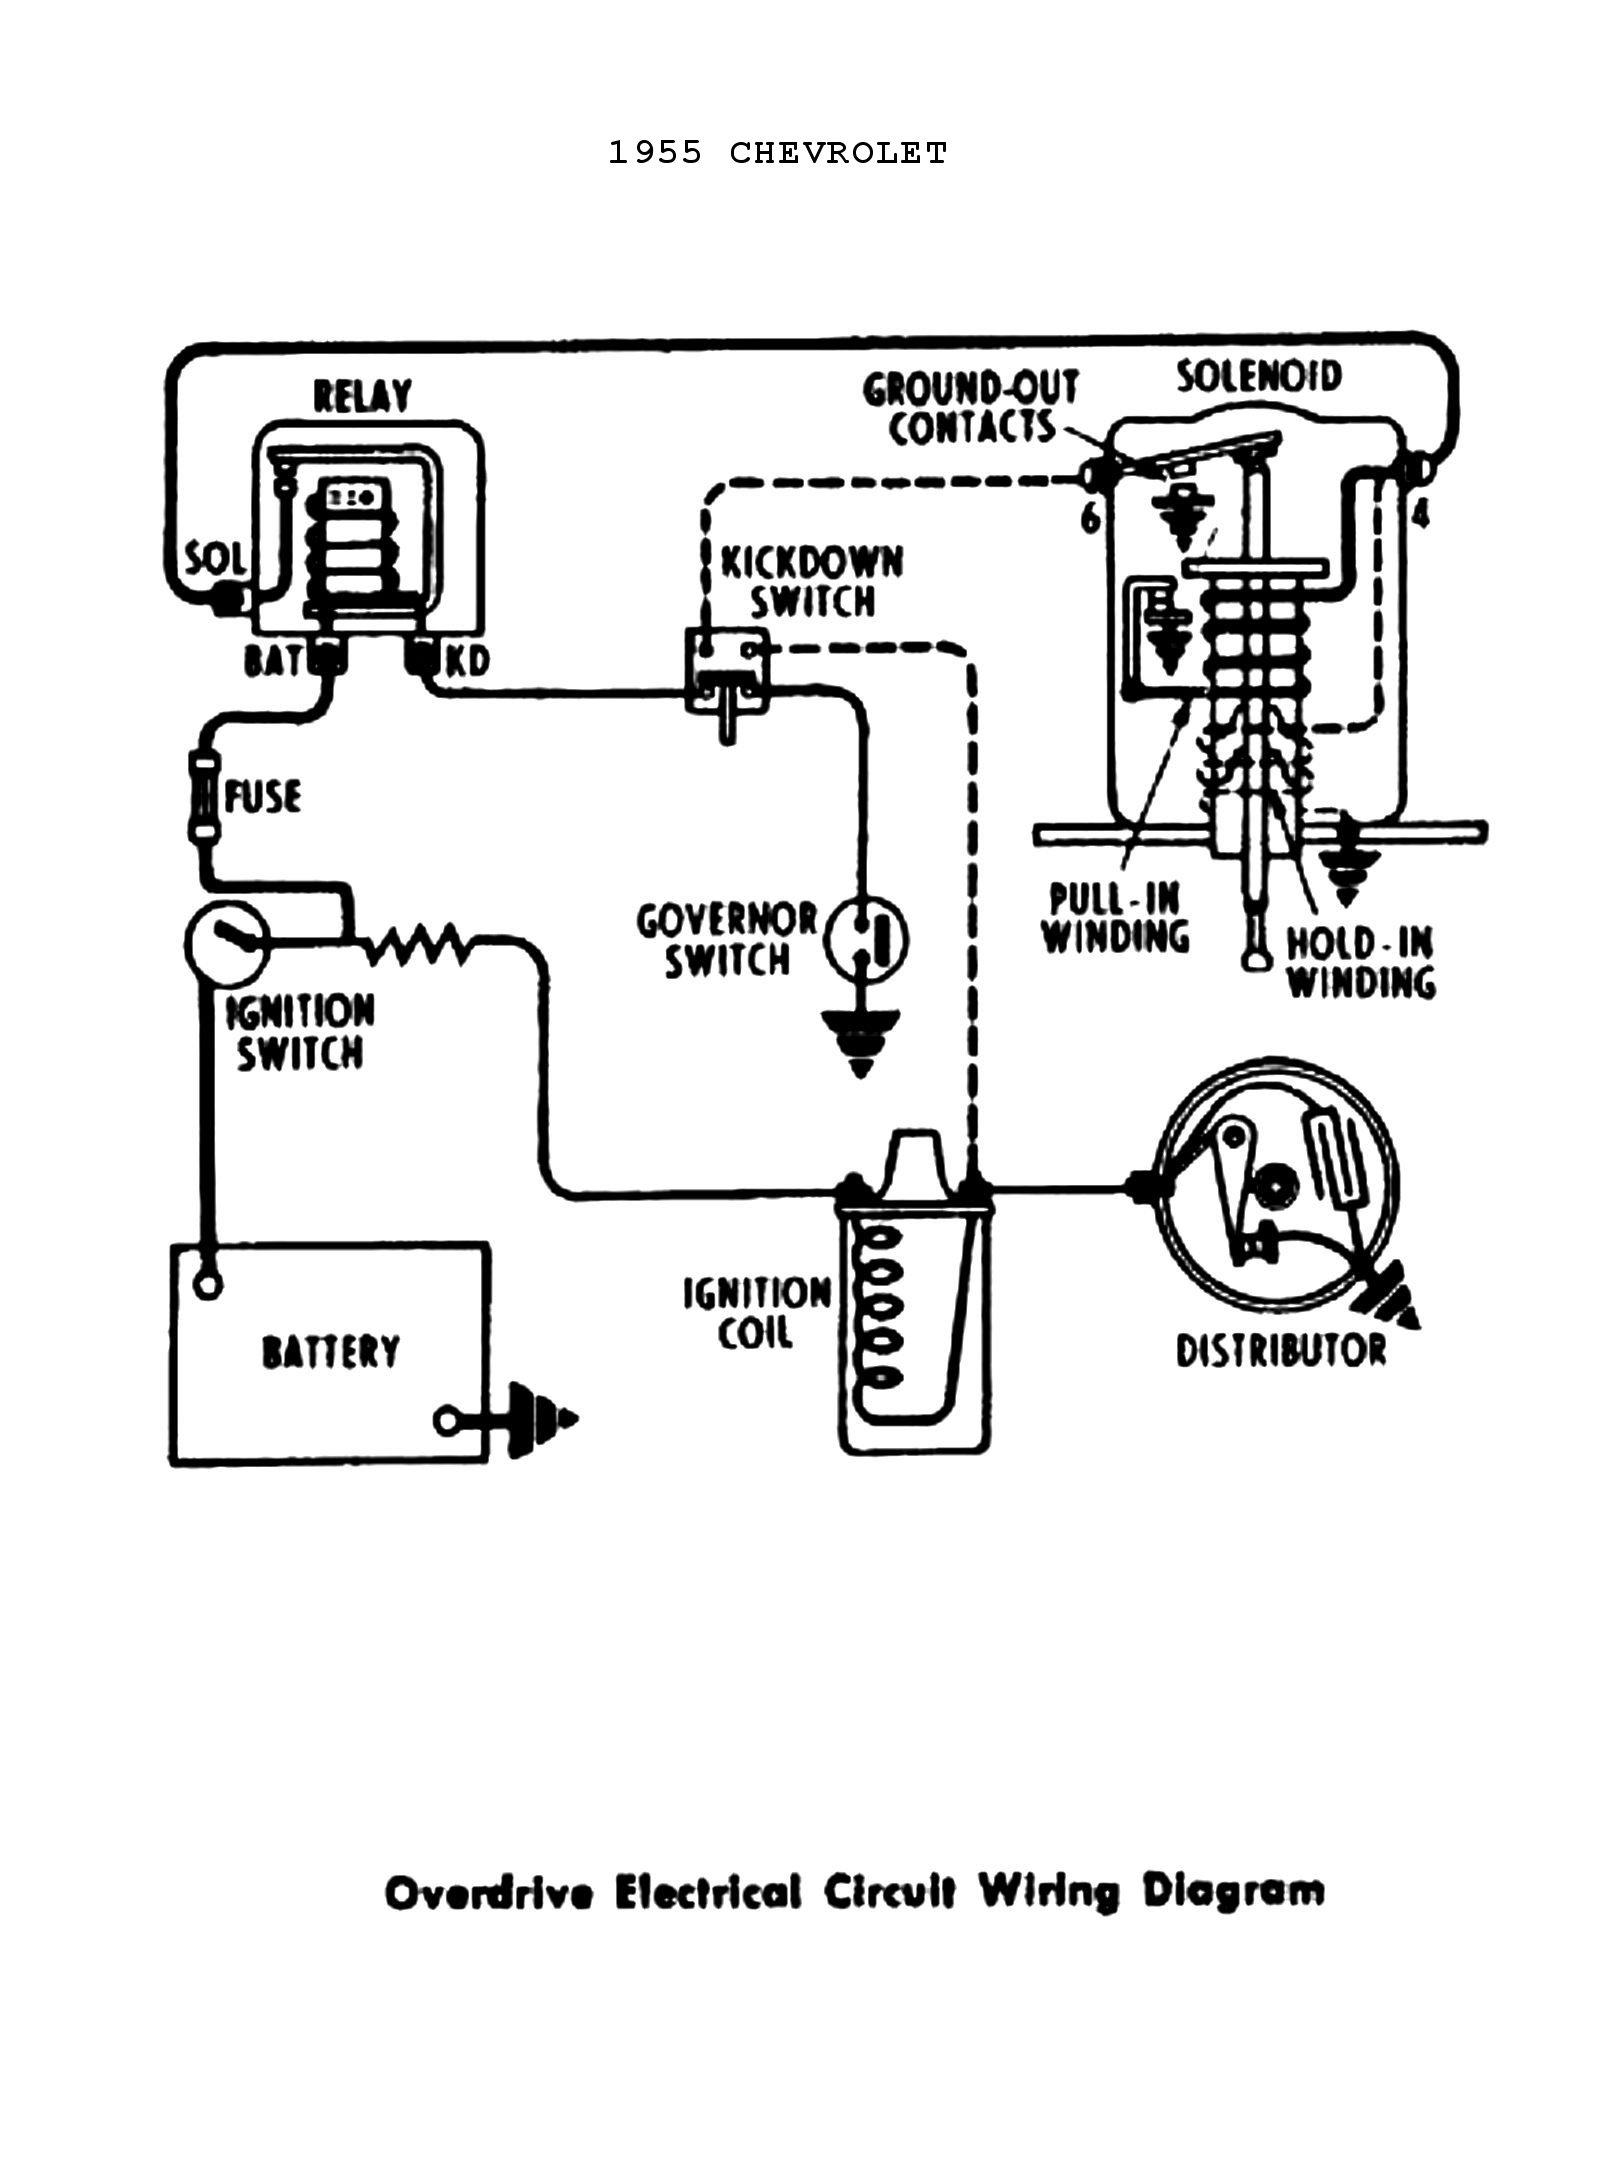 57 Chevy Coil Wiring Diagram, Chevy 5 3 Ignition Coil Wiring Diagram